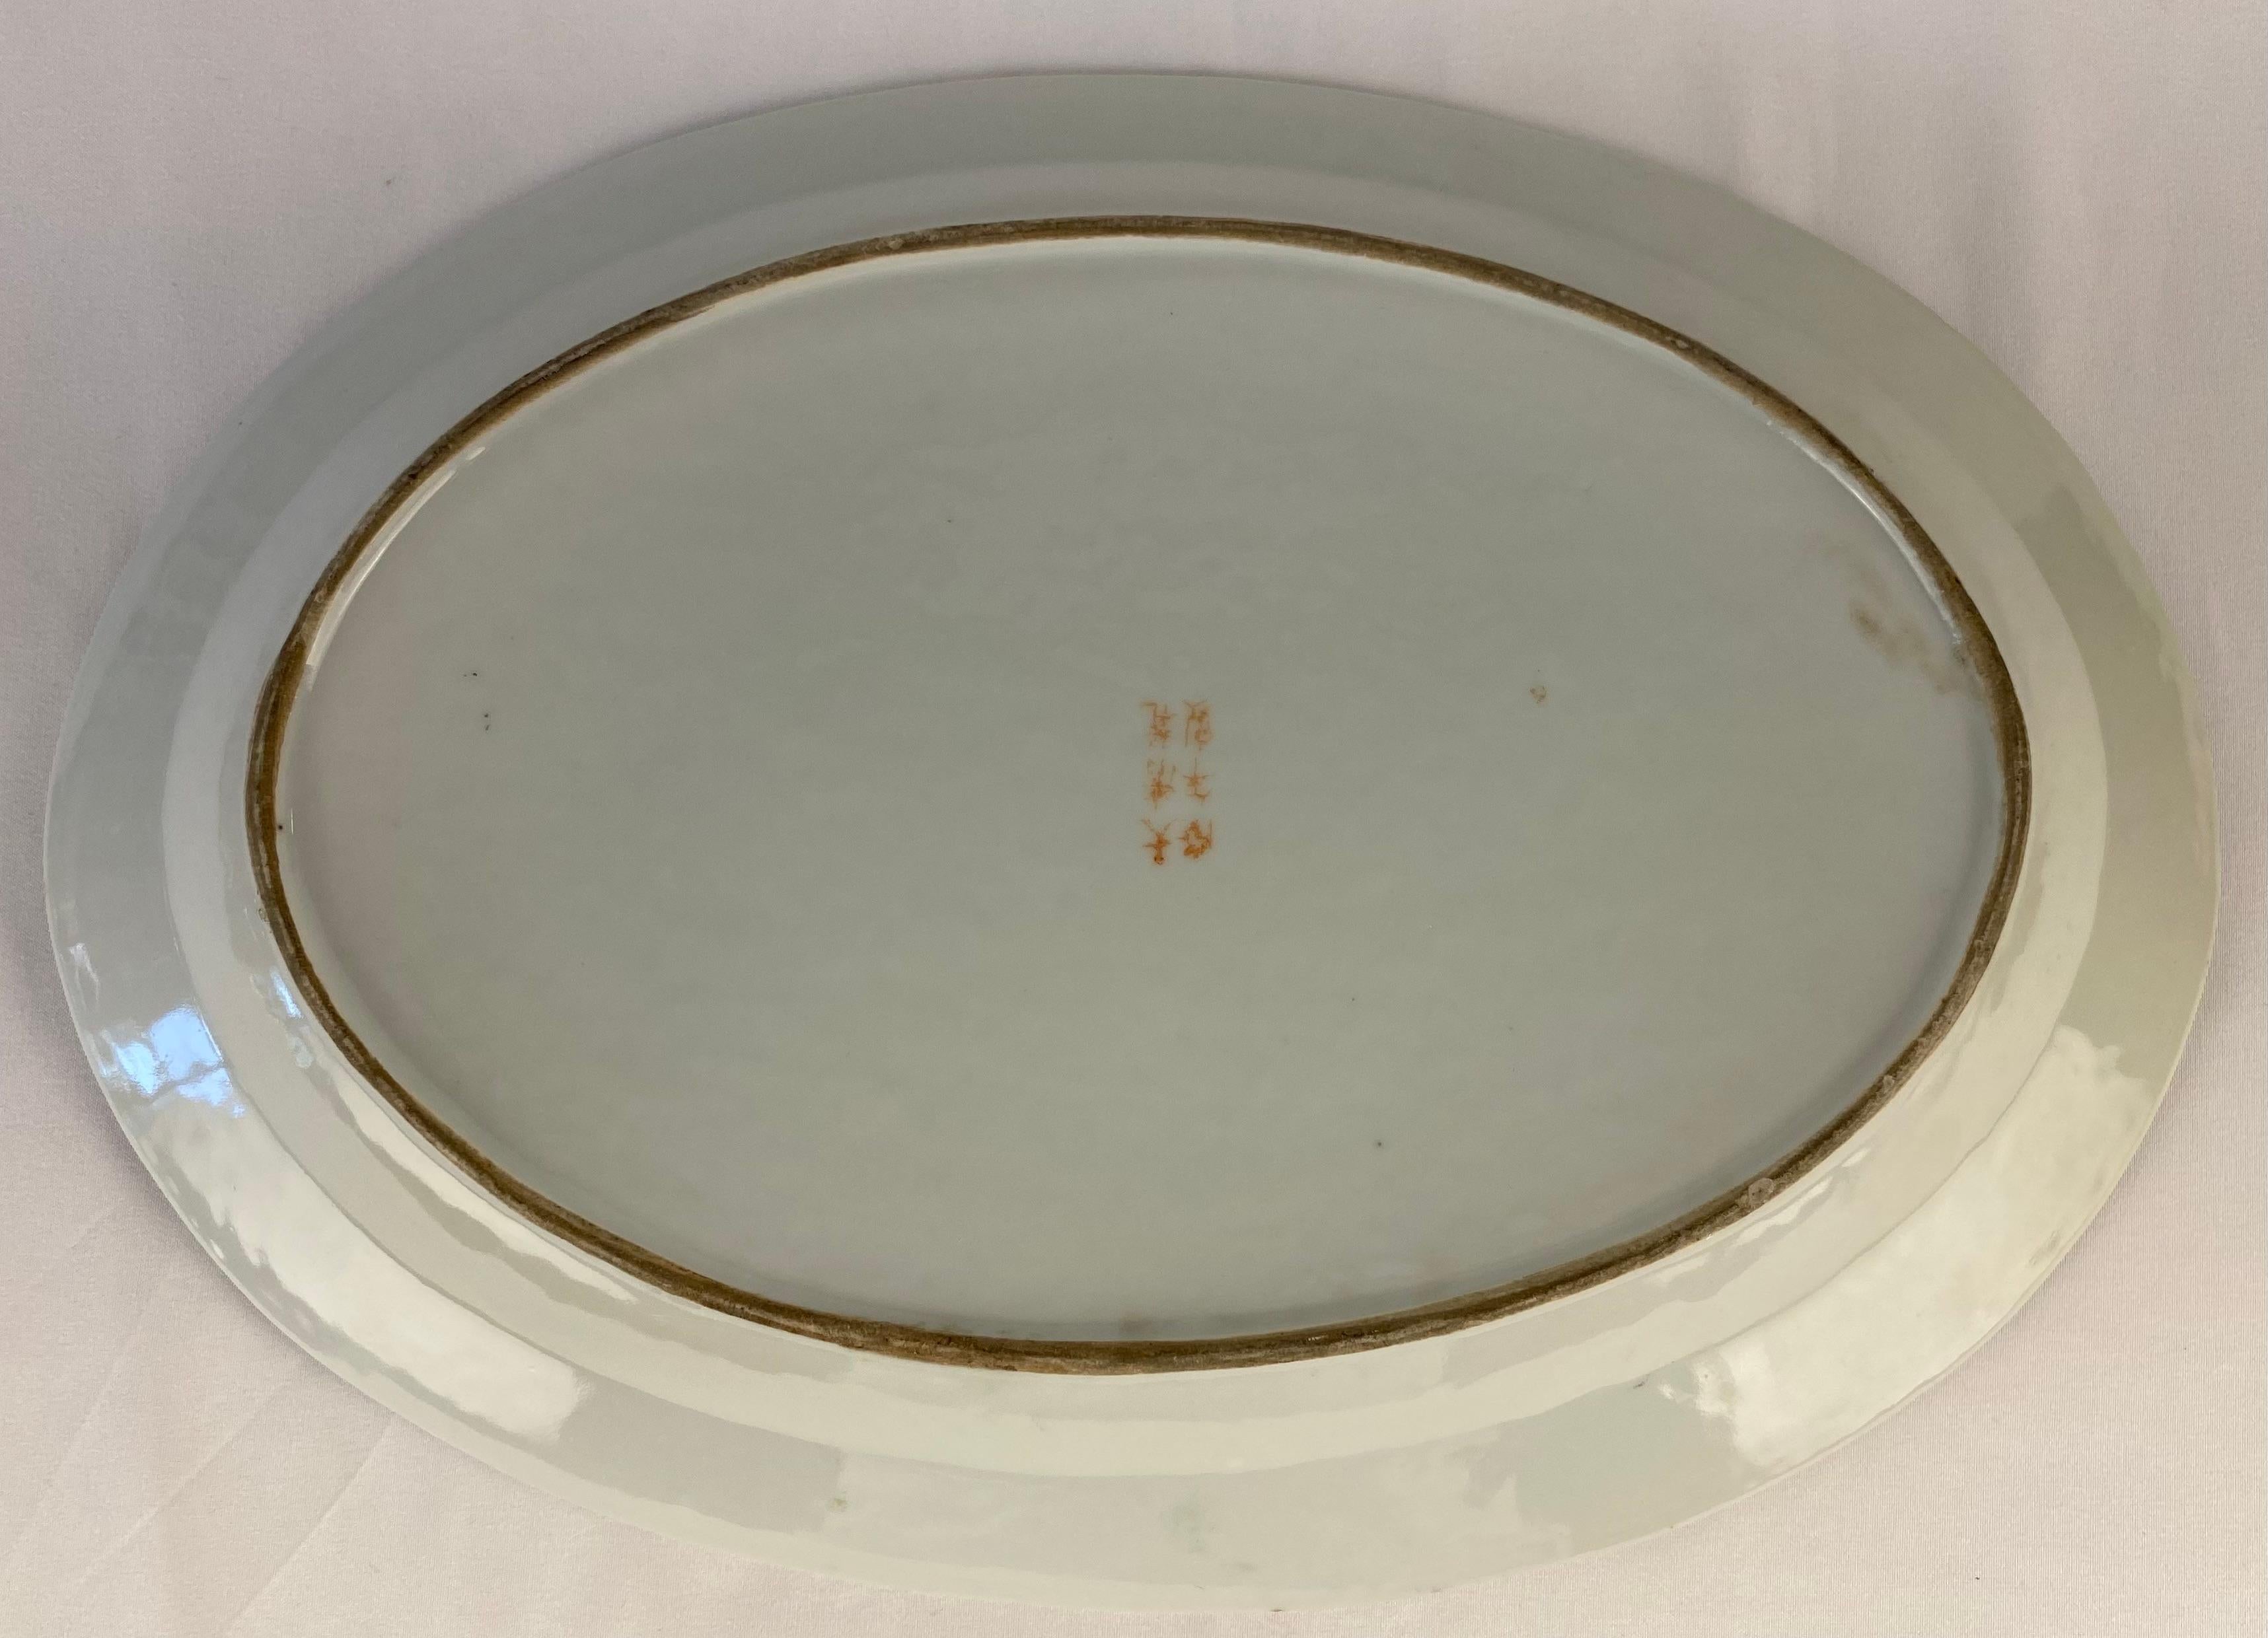 Art Deco Period Chinese Famille Rose Porcelain Bowl or Platter  In Good Condition For Sale In Miami, FL